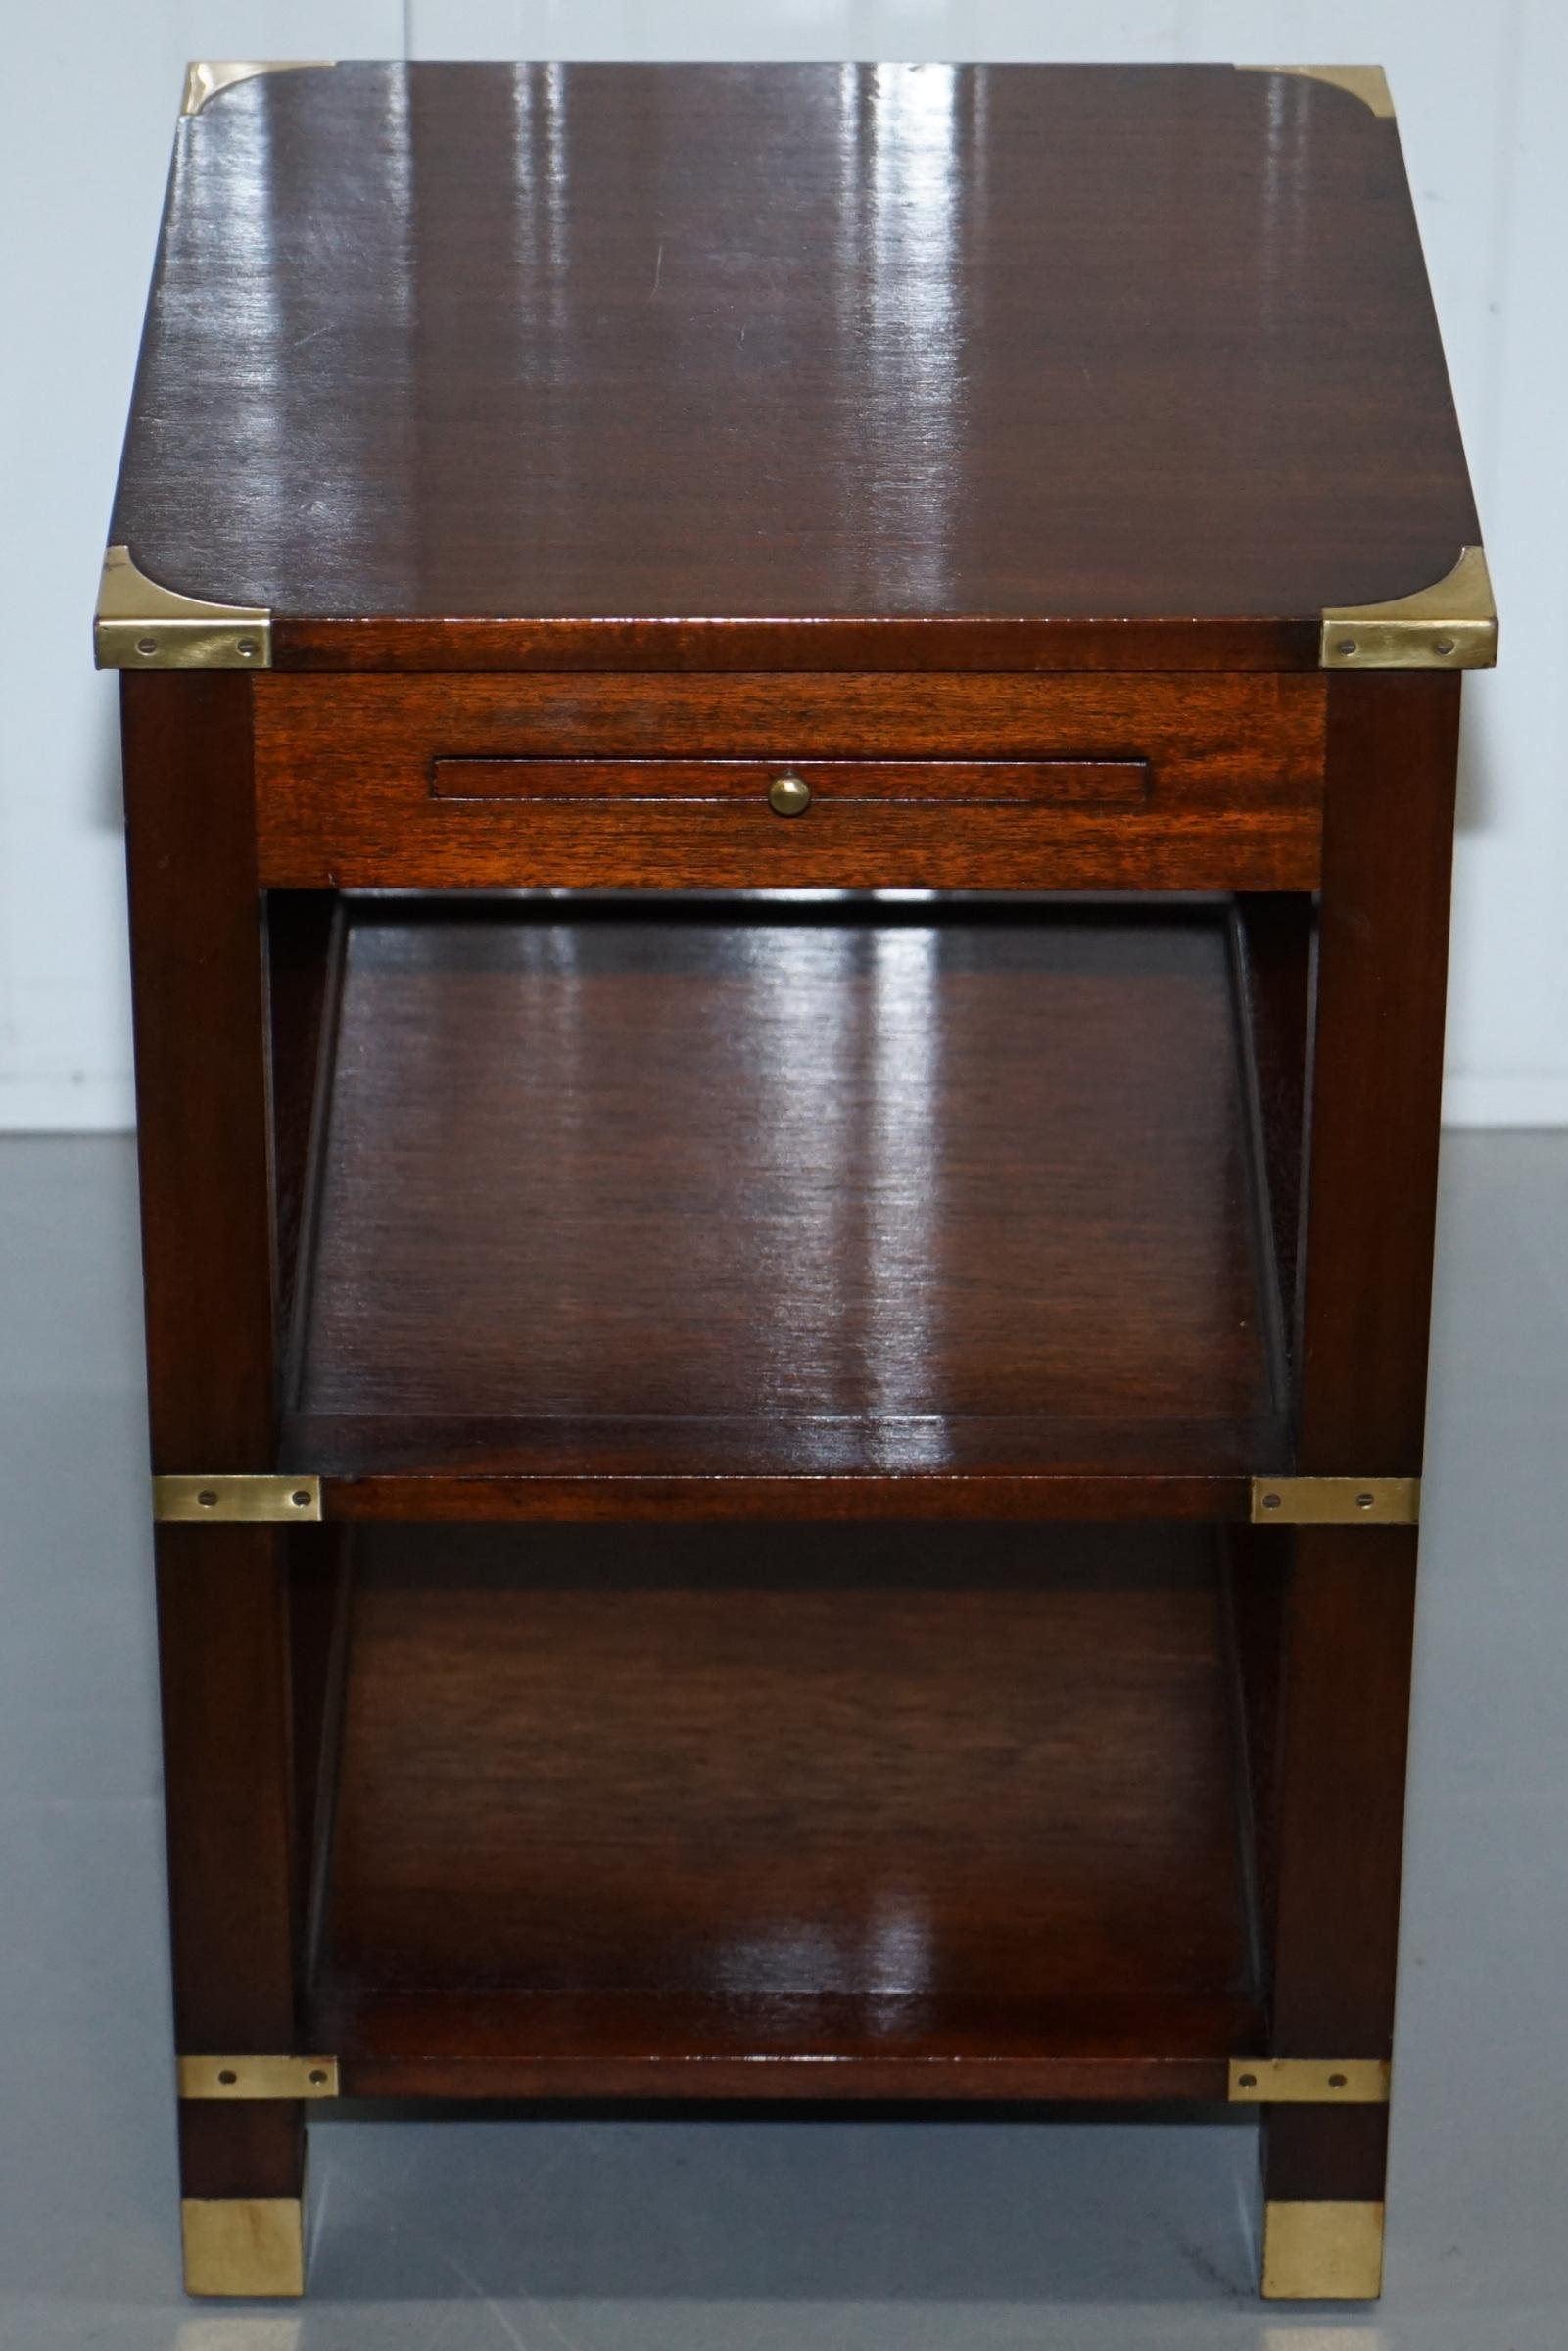 Regency Harrods London Kennedy Furniture Side End Lamp Table with Leather Butlers Tray